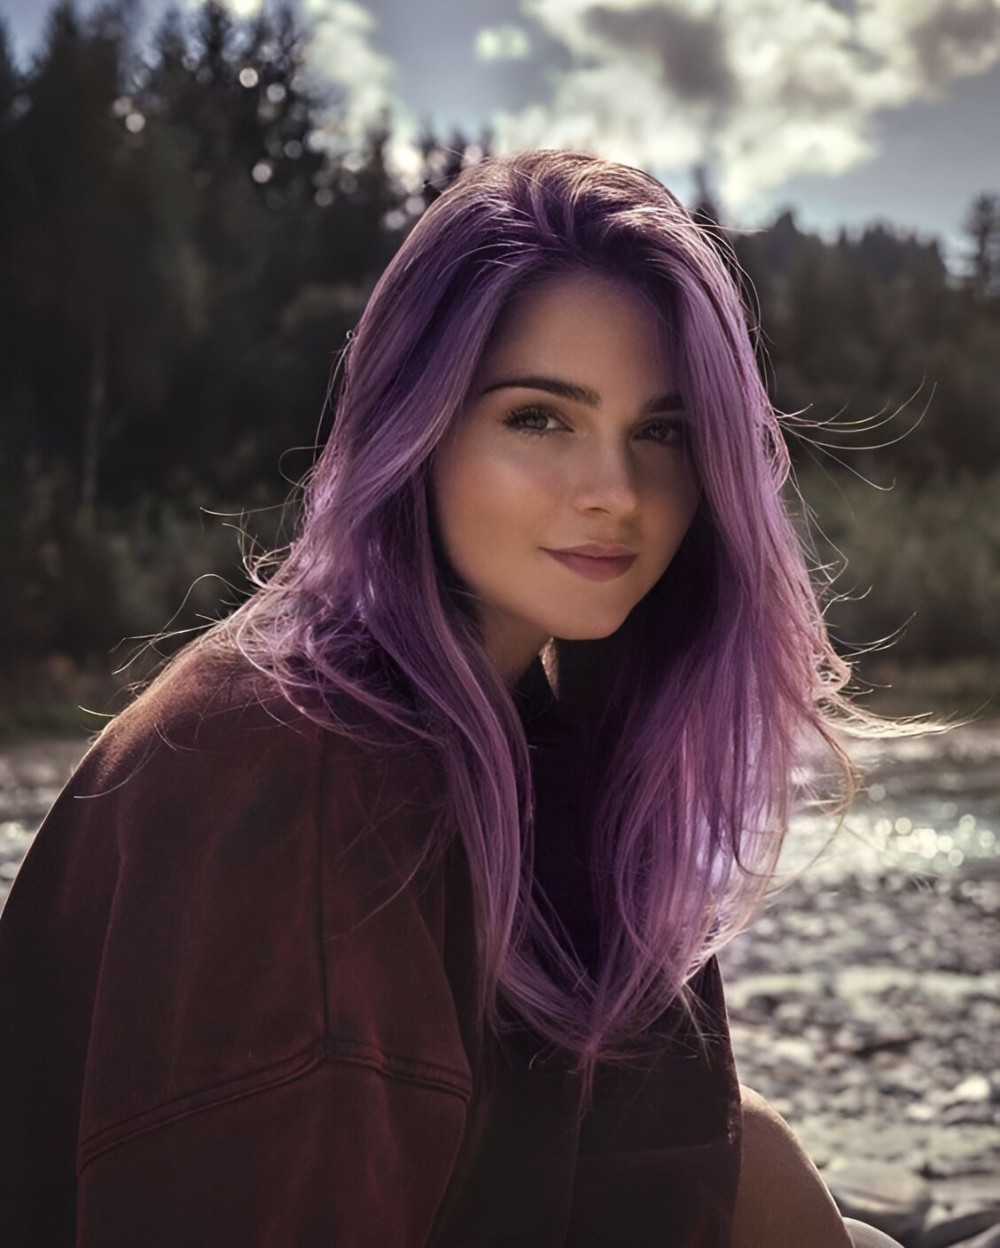 Become A Model With These 27 Gorgeous Plum Hair Color Ideas - 219